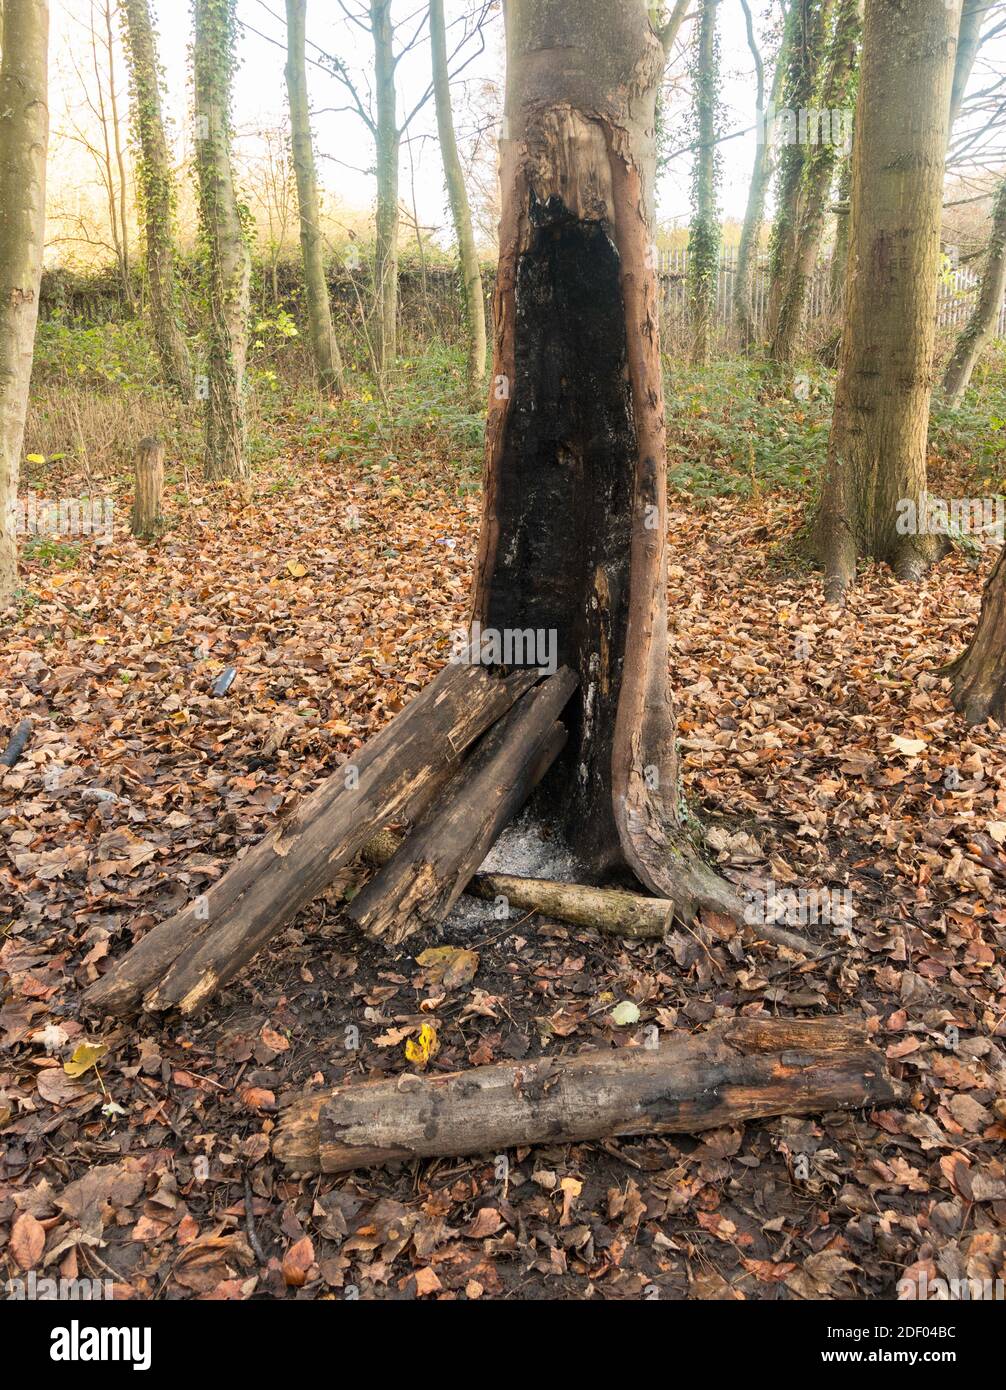 Vandalism connected to rough camping, living tree burnt as a camp fire, England, UK Stock Photo